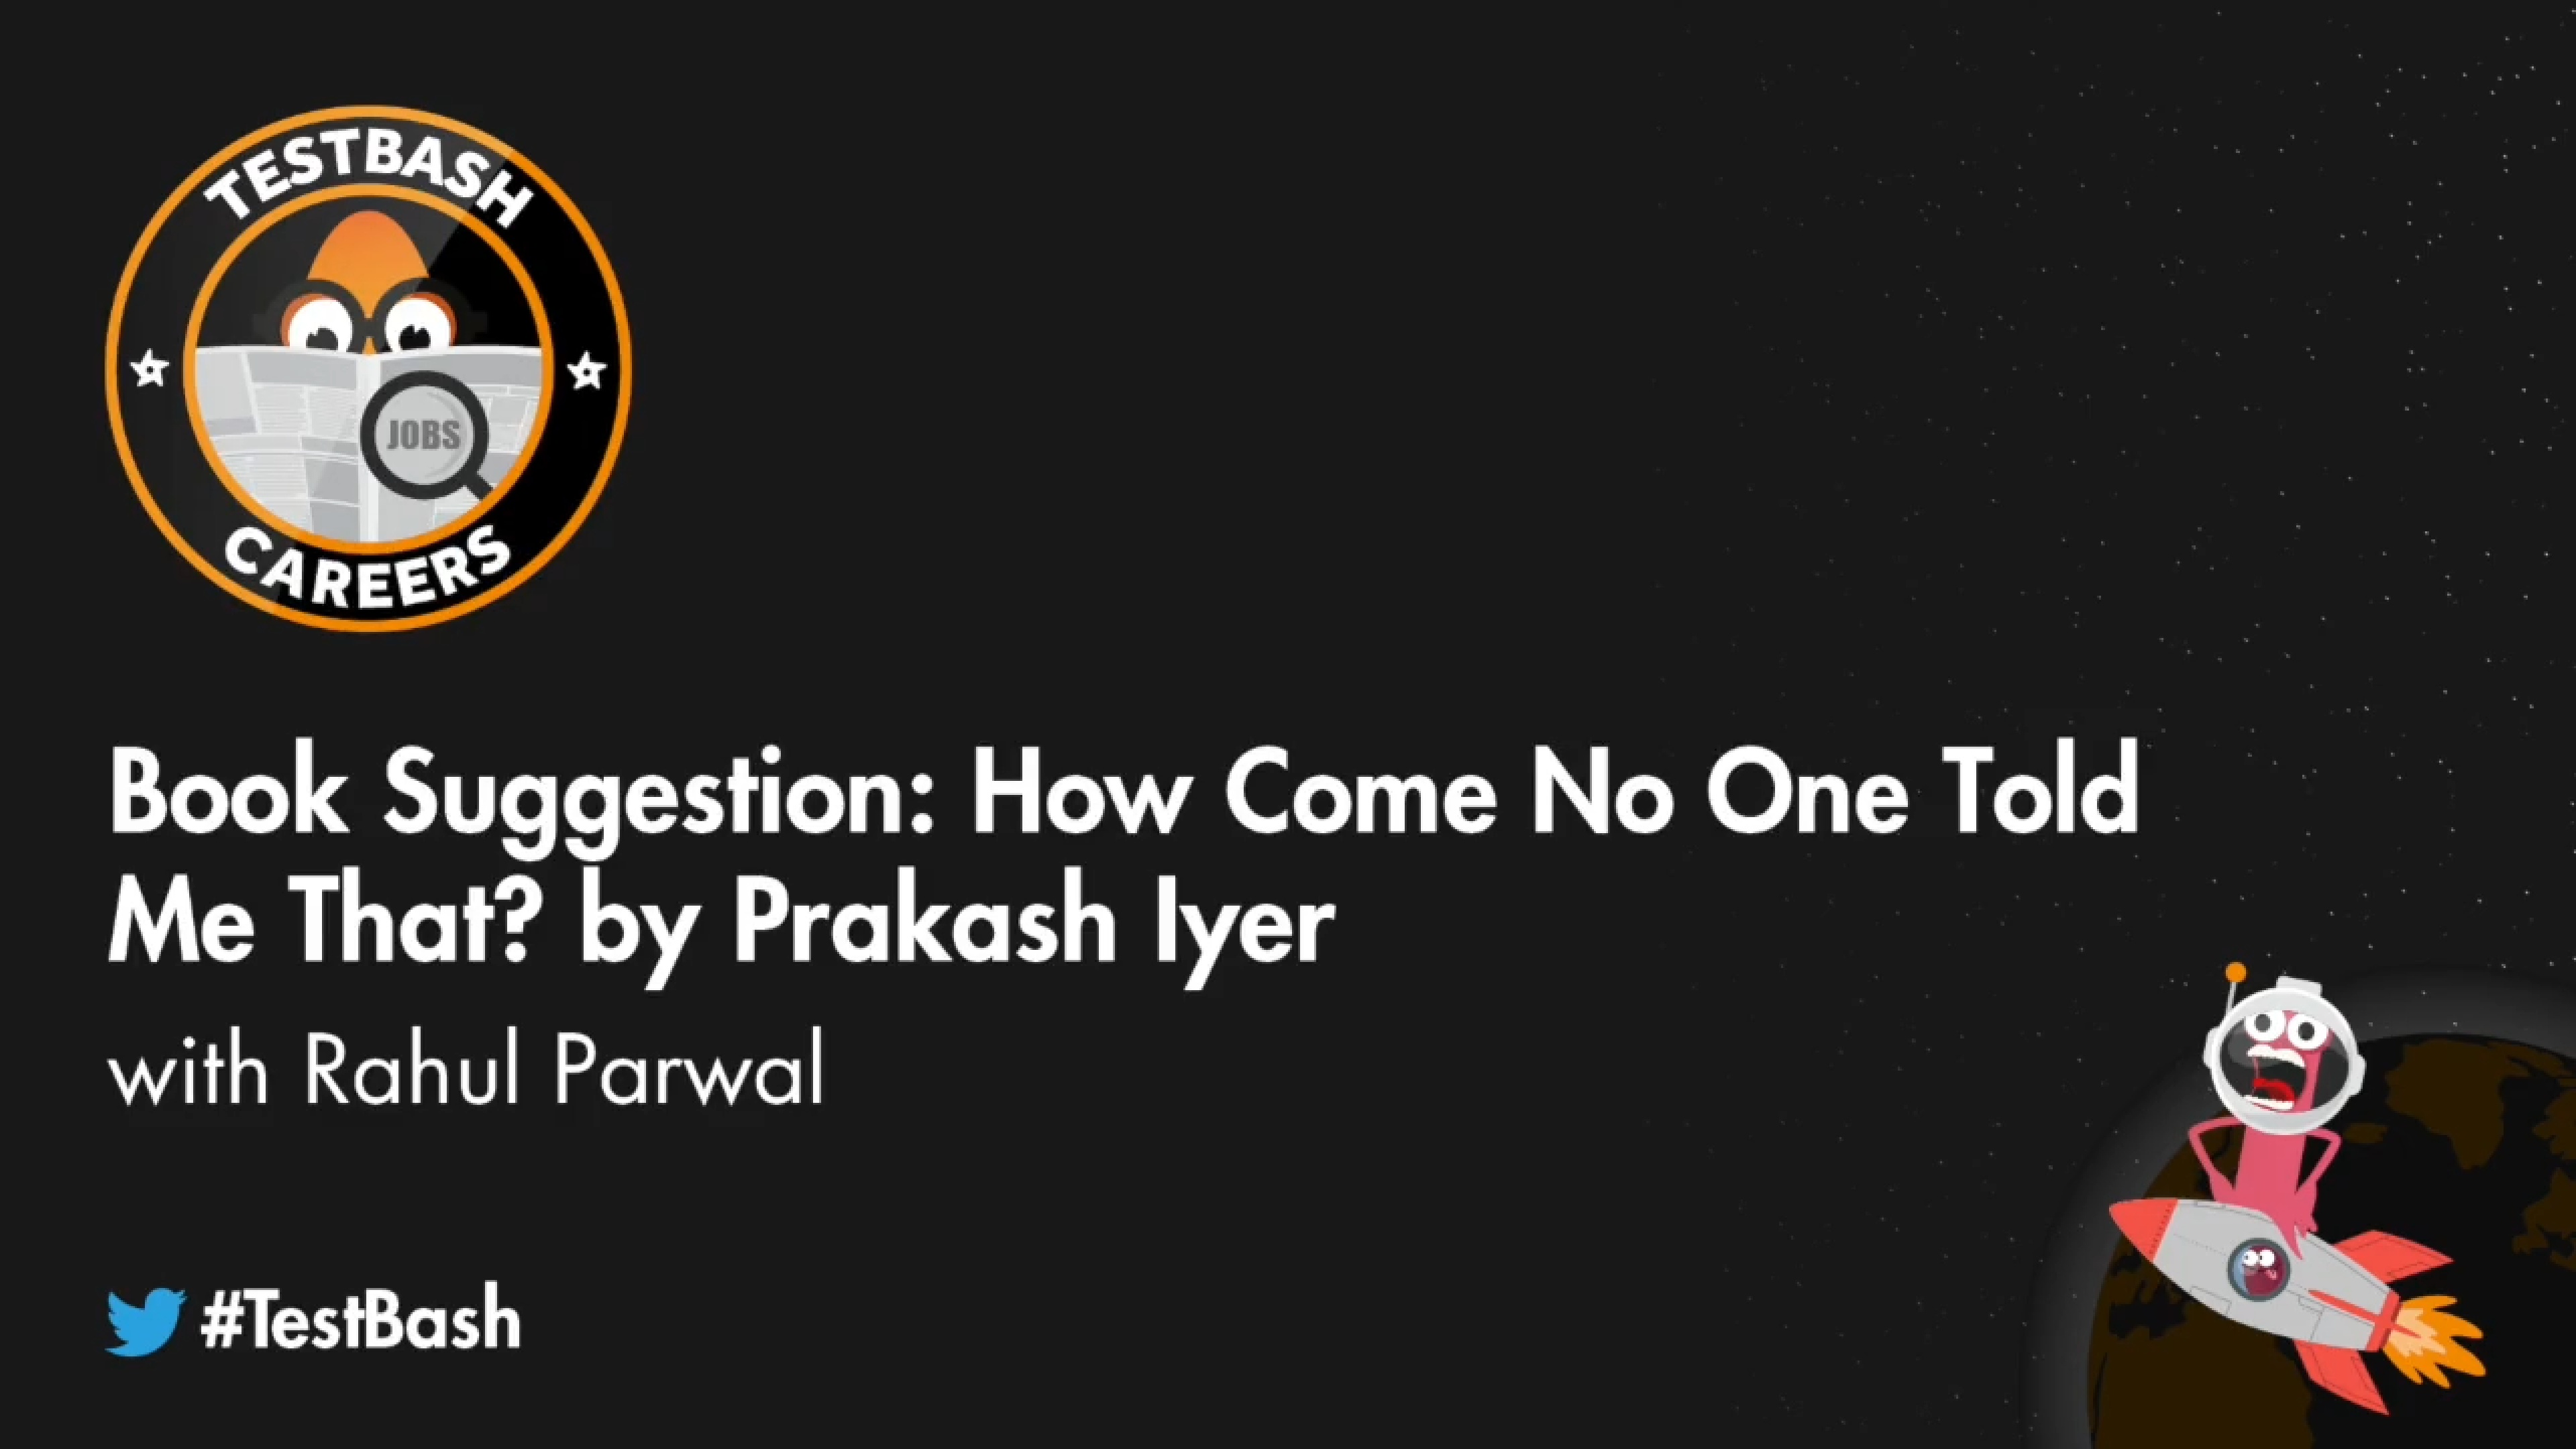 Book Suggestion: How Come No One Told Me That? by Prakash Iyer - Rahul Parwal